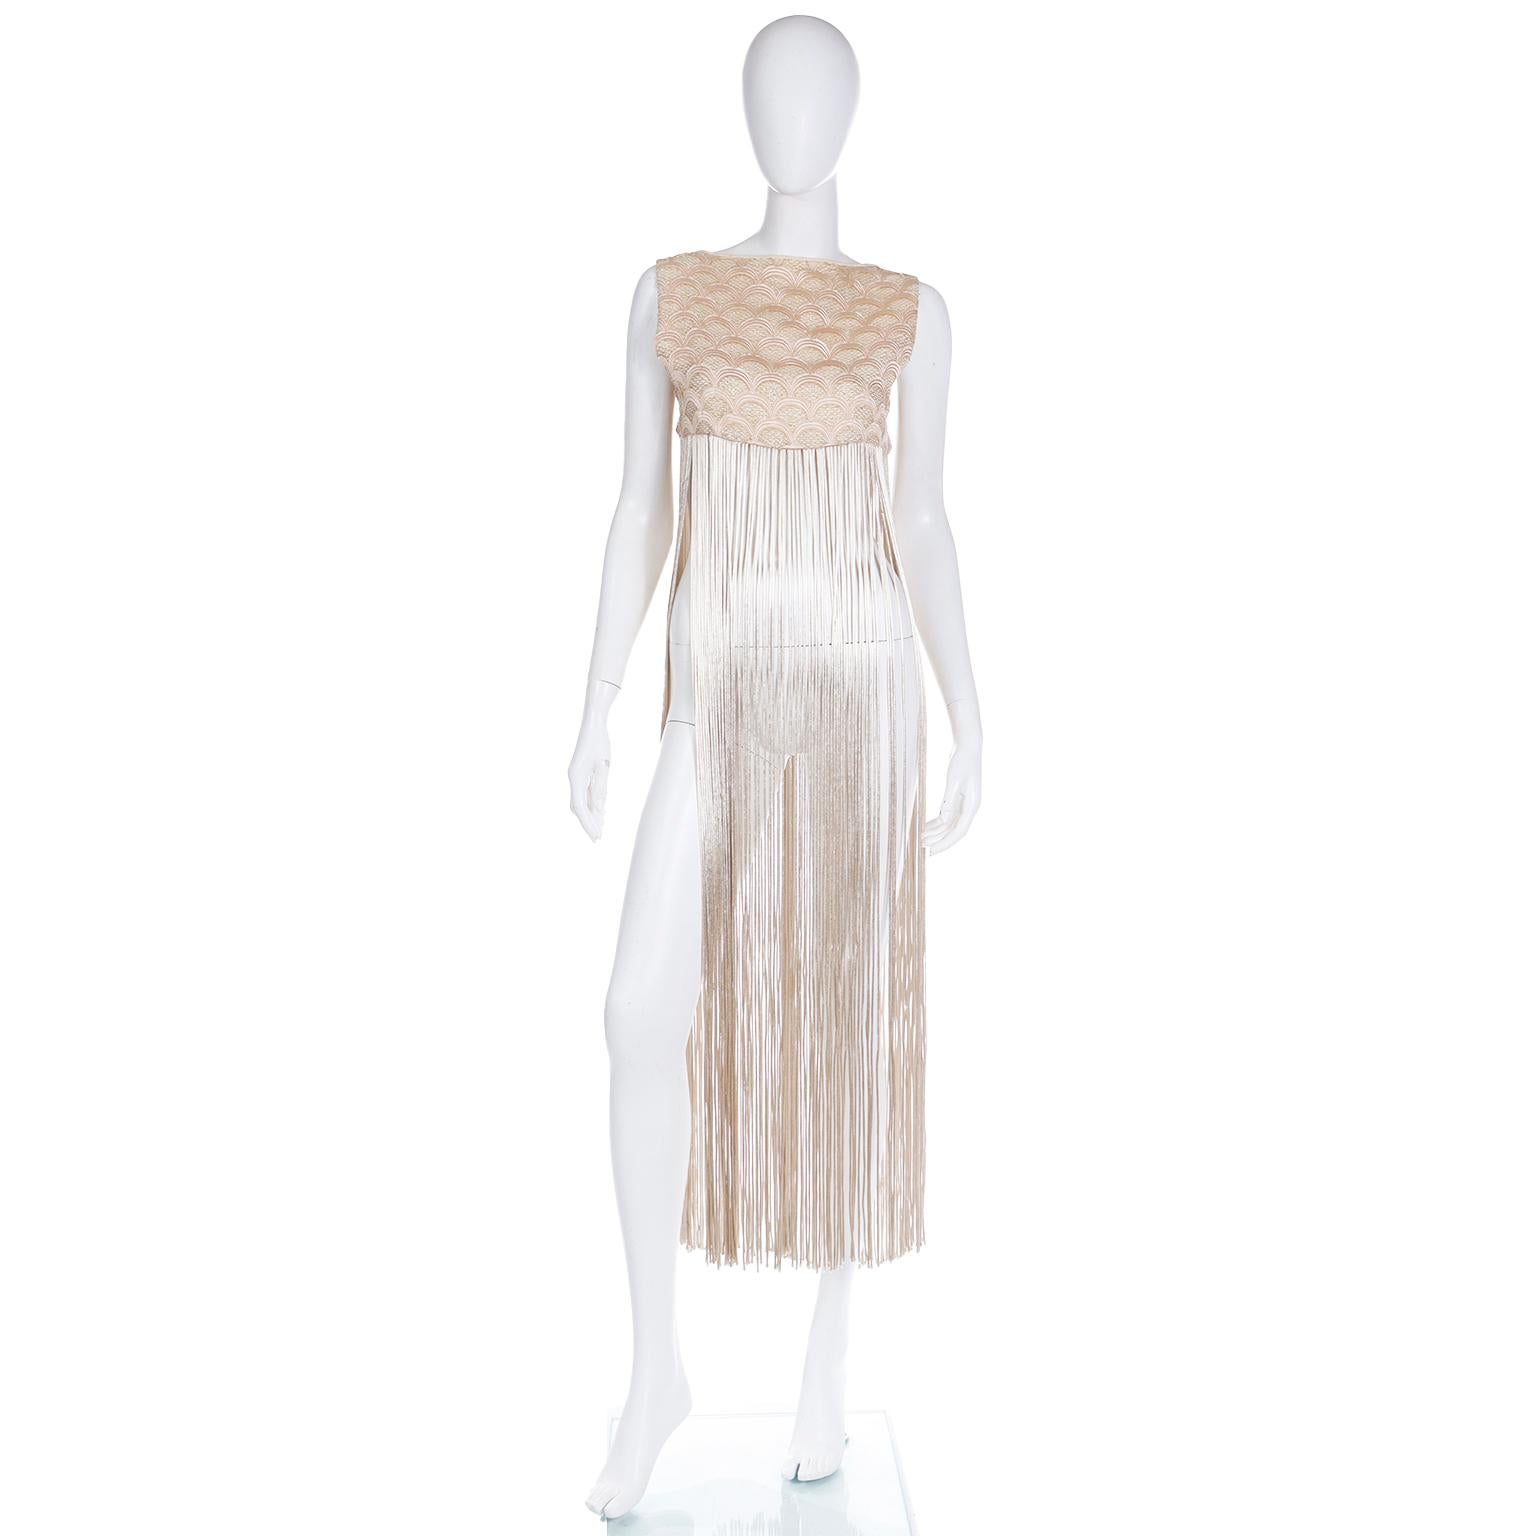 This great vintage 1970's long fringed vest is so gorgeous and it would add the perfect amount of drama and style to so many things you already own! There is detailed fish scale embroidery on the bodice in a soft pink set apart with gold metallic